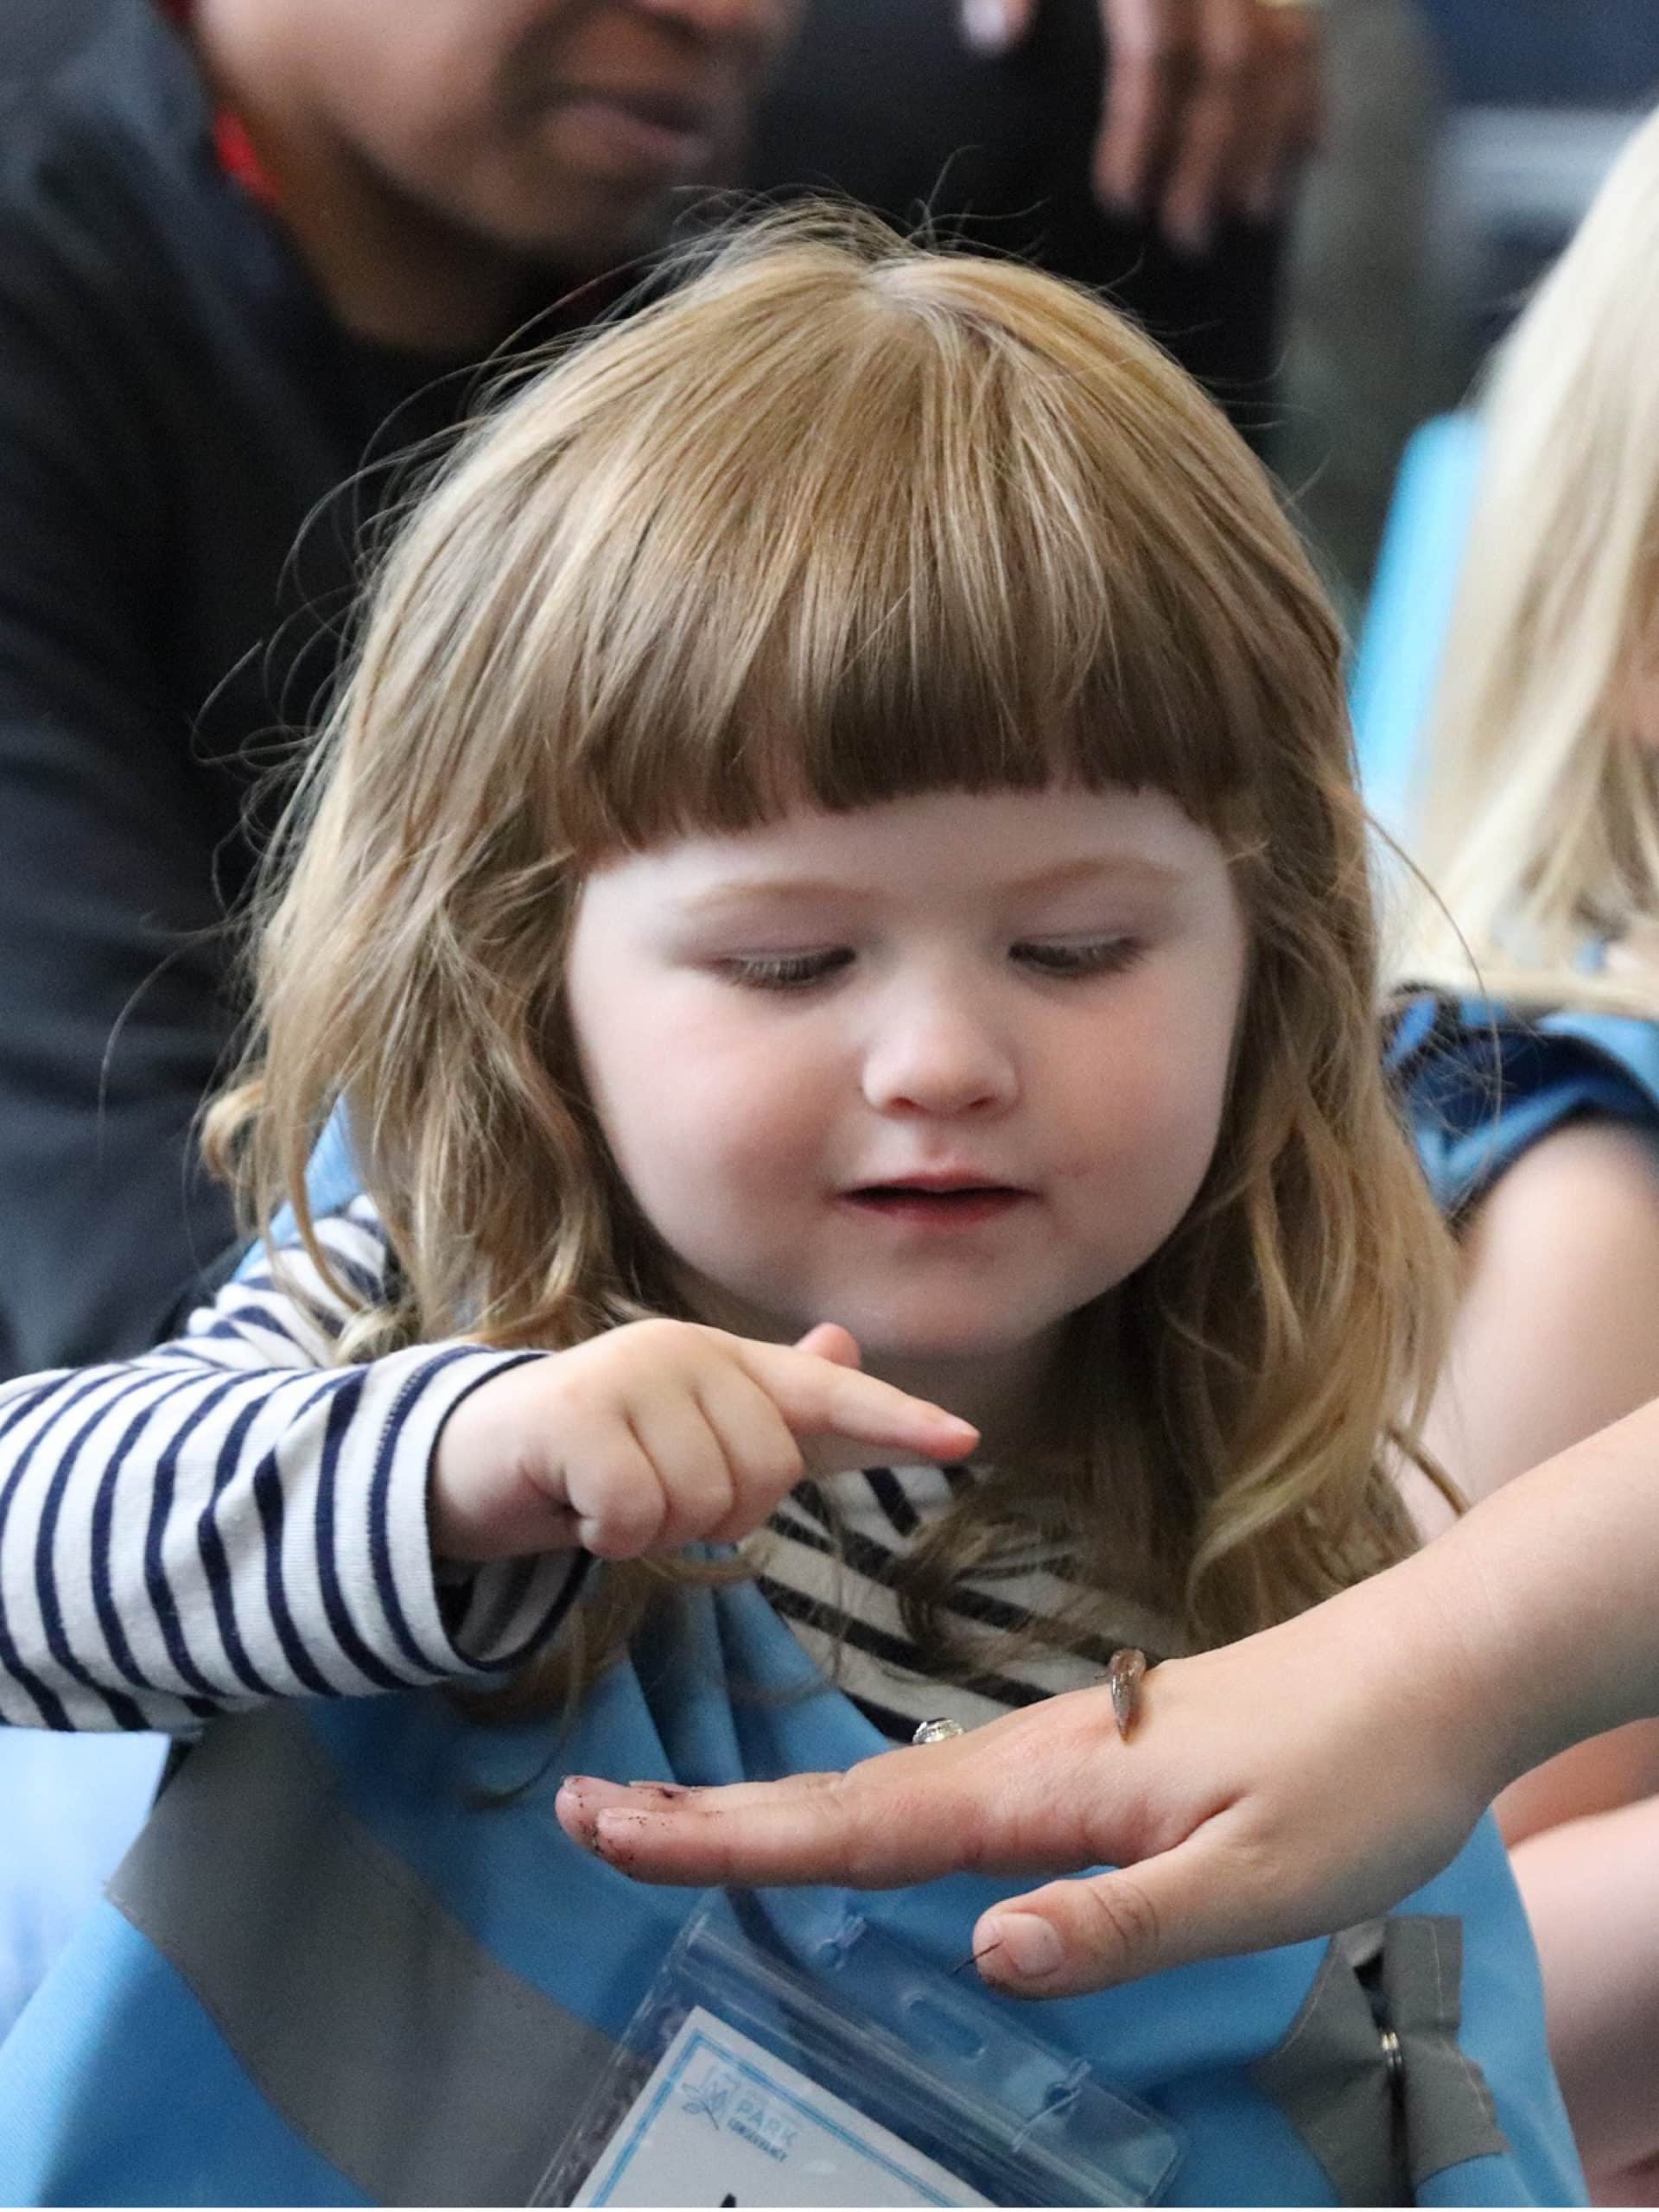 Small child looking at a worm on instructor's hand.